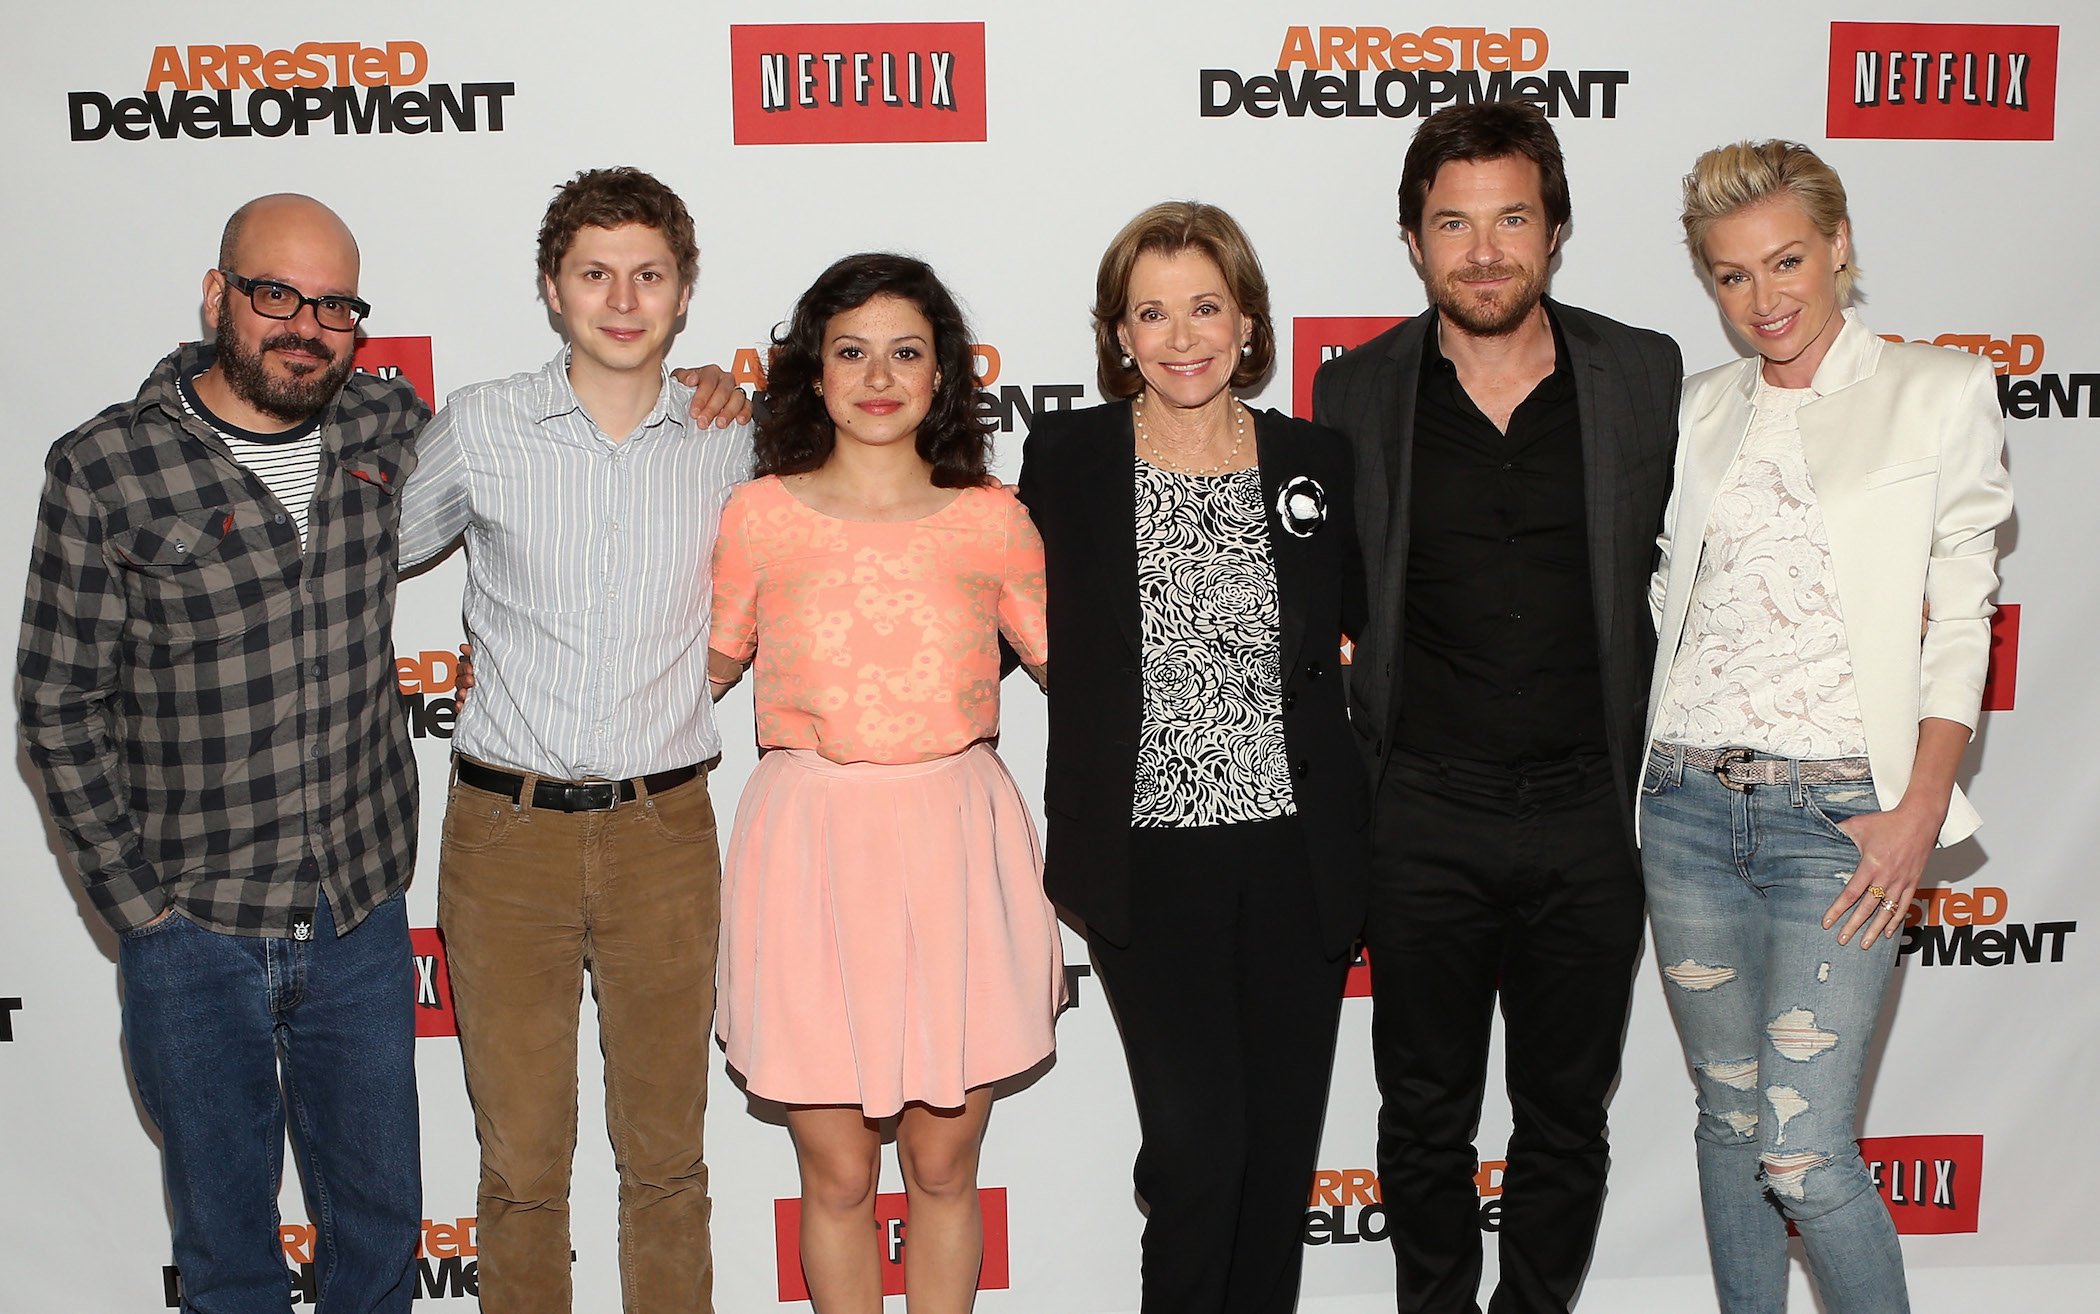 The cast of 'Arrested Development,' including Jessica Walter, standing with her co-stars at a Netflix press conference